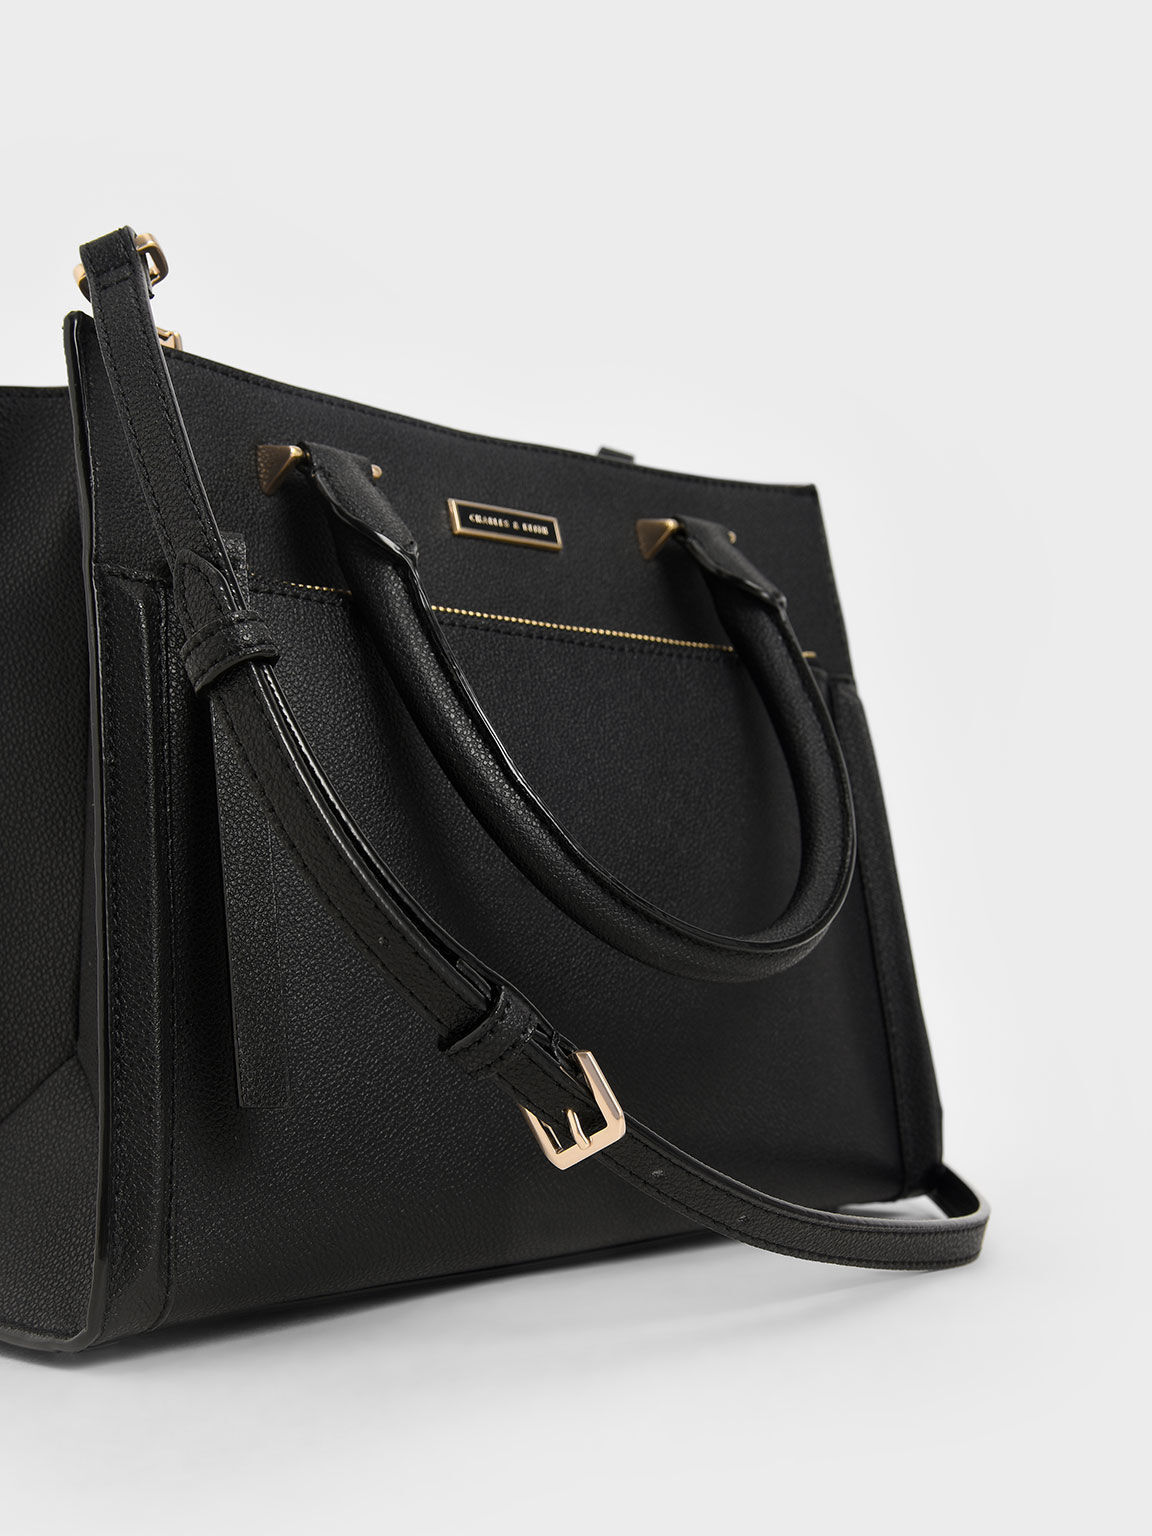 TÚI CHARLES KEITH DOUBLE HANDLE FRONT ZIP TOTE BAG 4